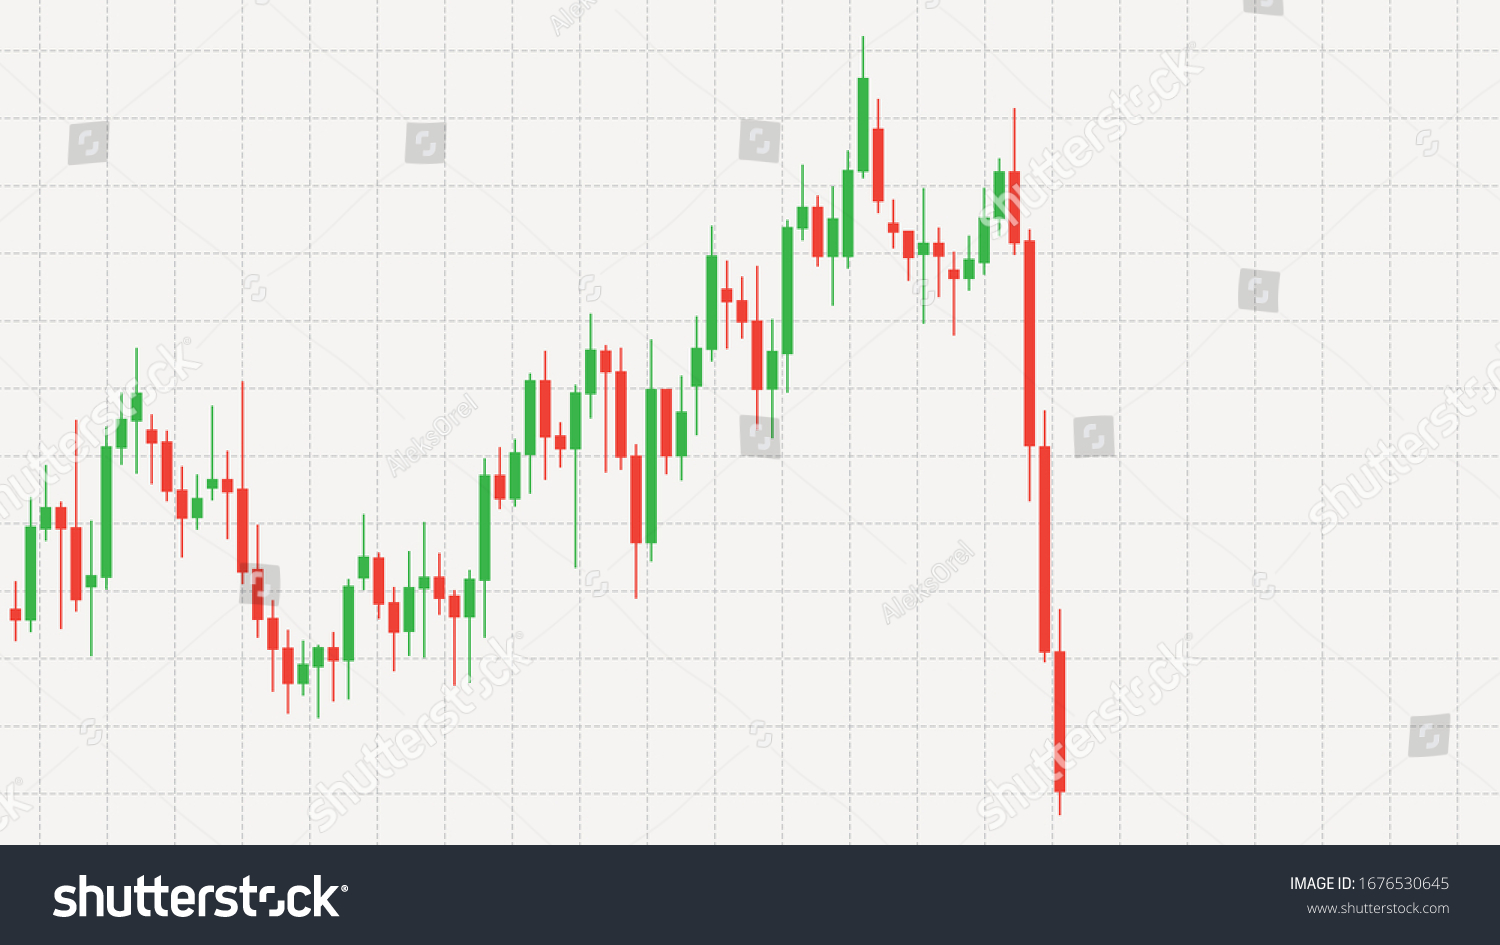 SVG of Stock market decline vector illustration. Stock market quotes decline concept. Graph illustrating the collapse of the financial market.
 svg